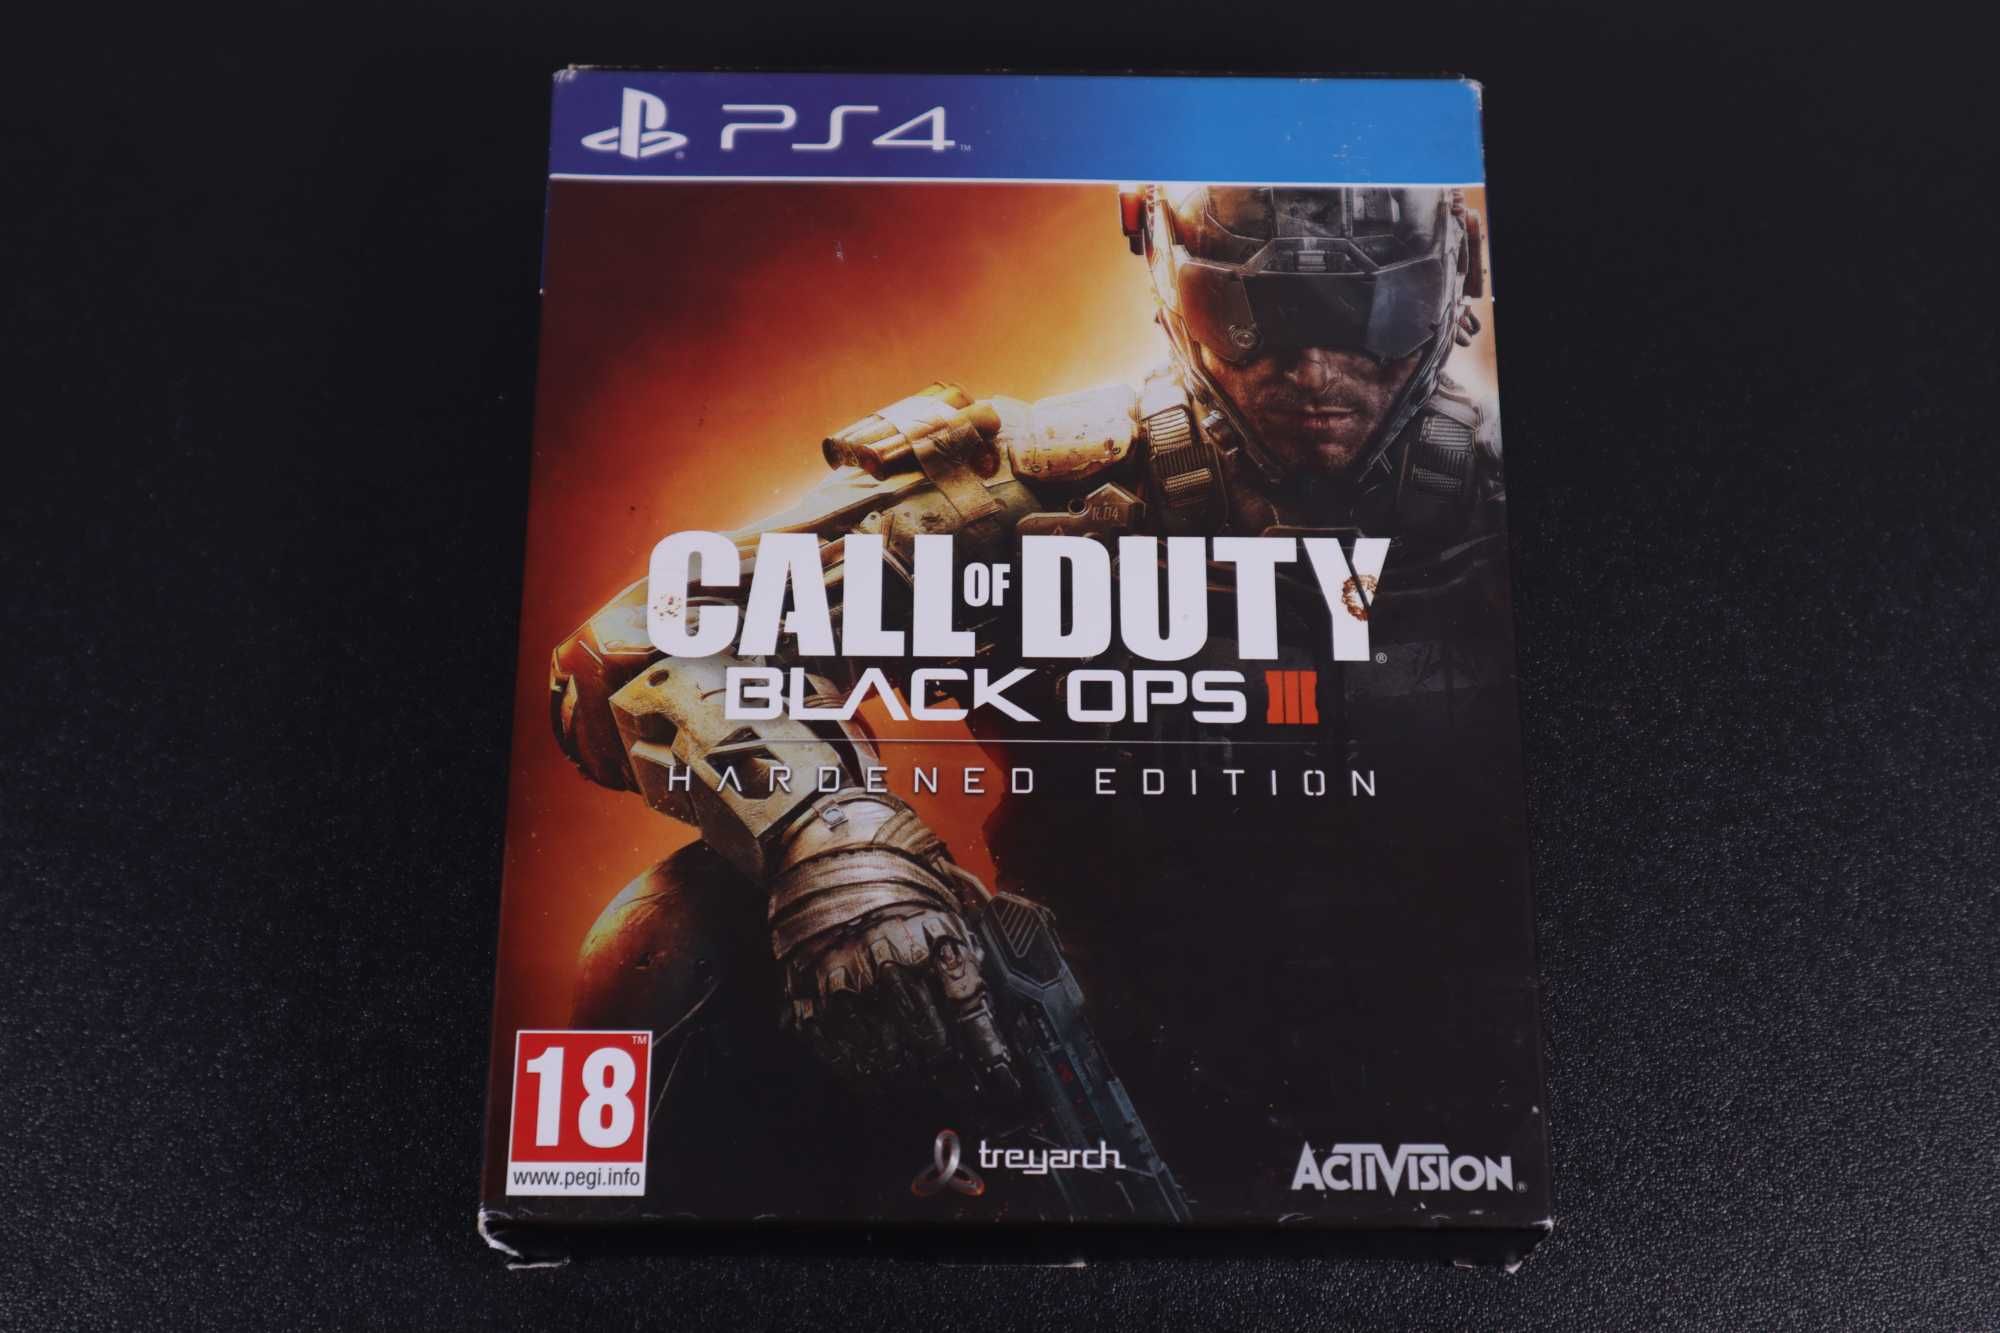 Call of Dutty Black Ops 3 hardened edition (PS4)